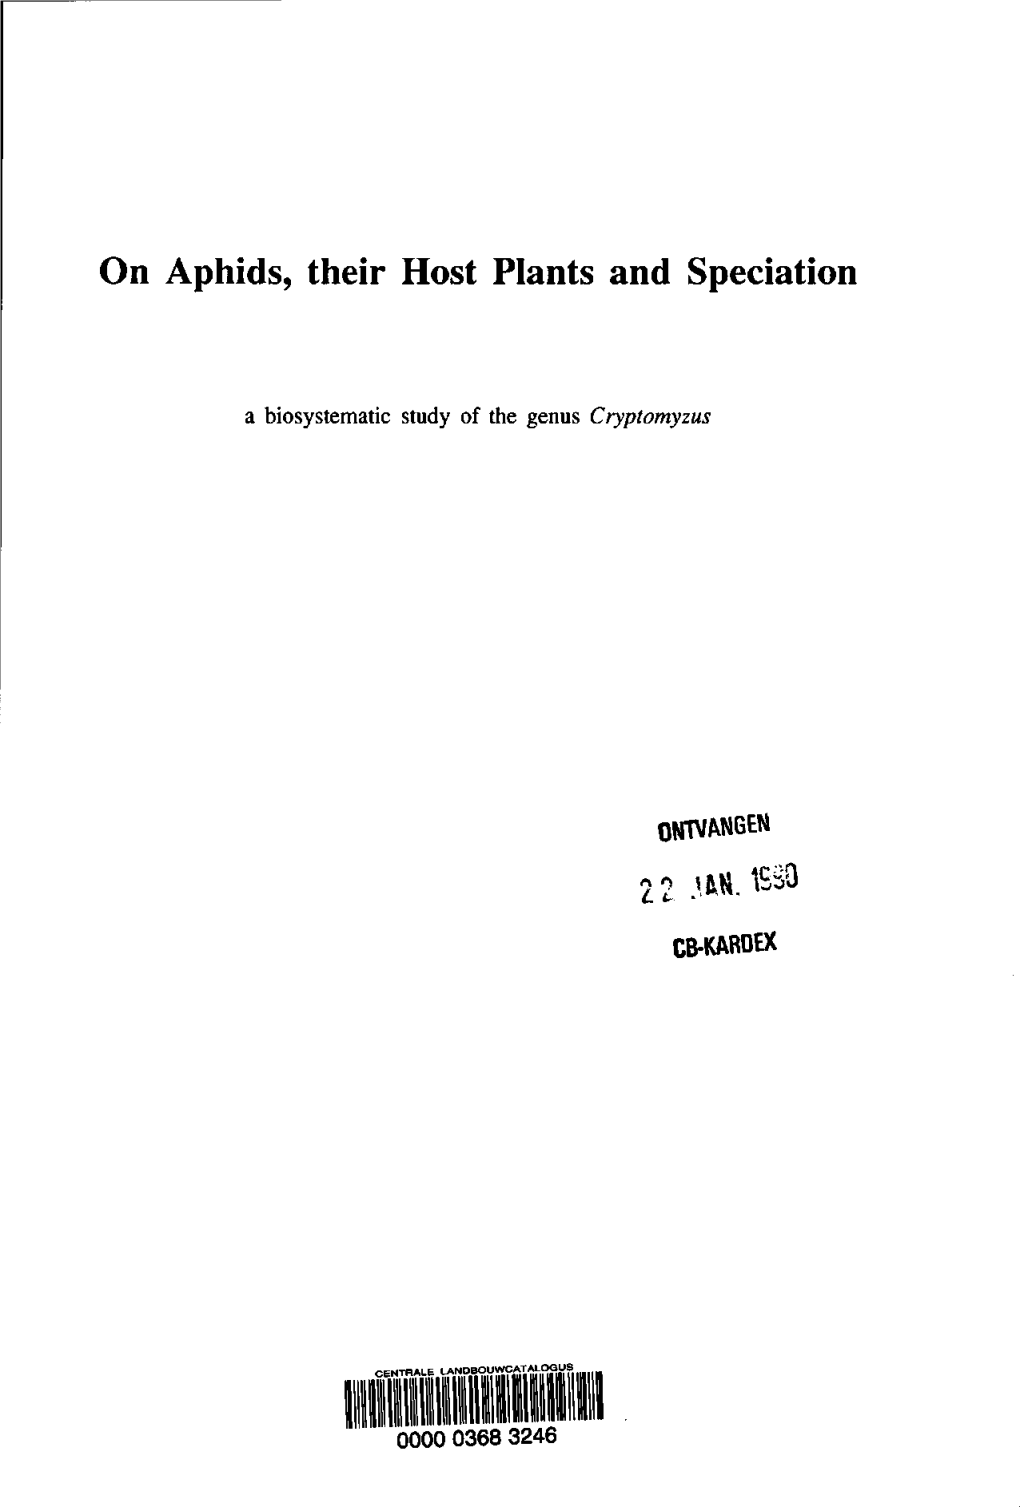 On Aphids, Their Host Plants and Speciation